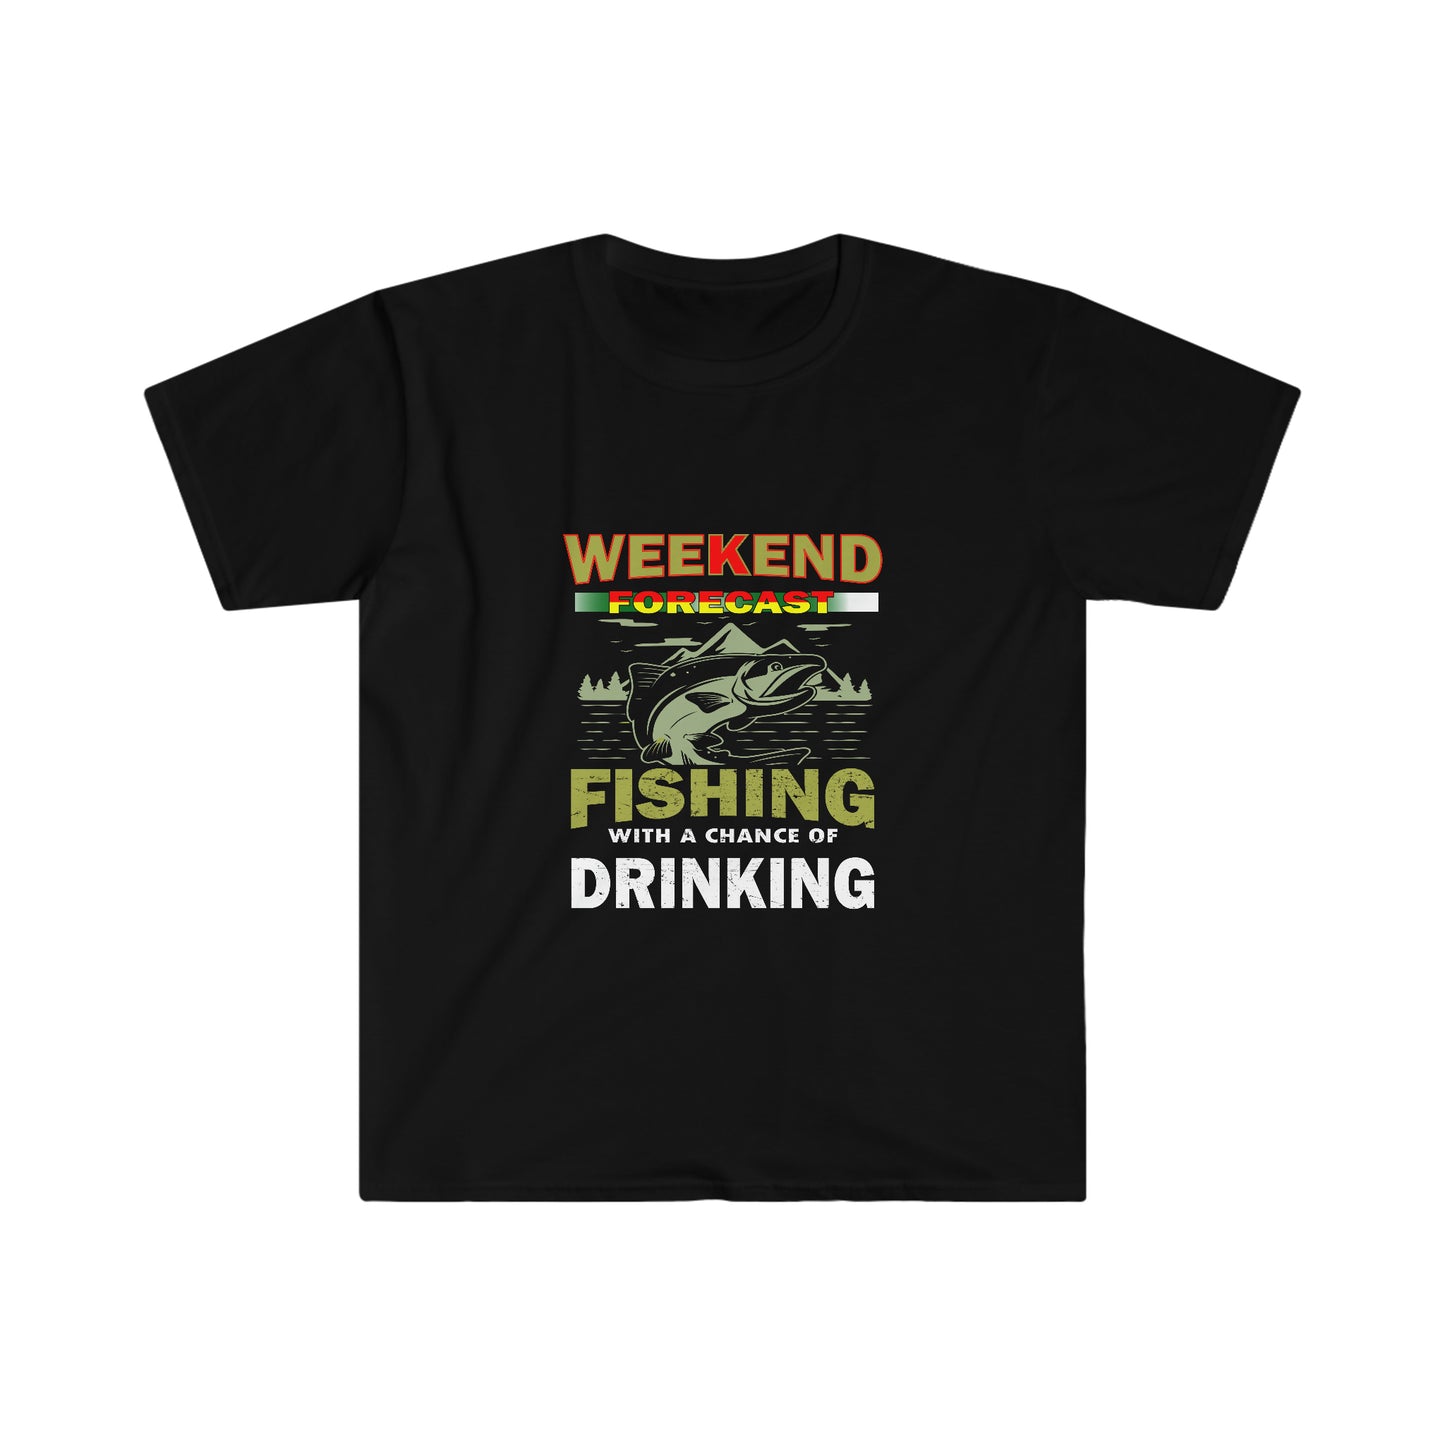 Weekend Forecast - Fishing With a Chance of Drinking - Urban Camper